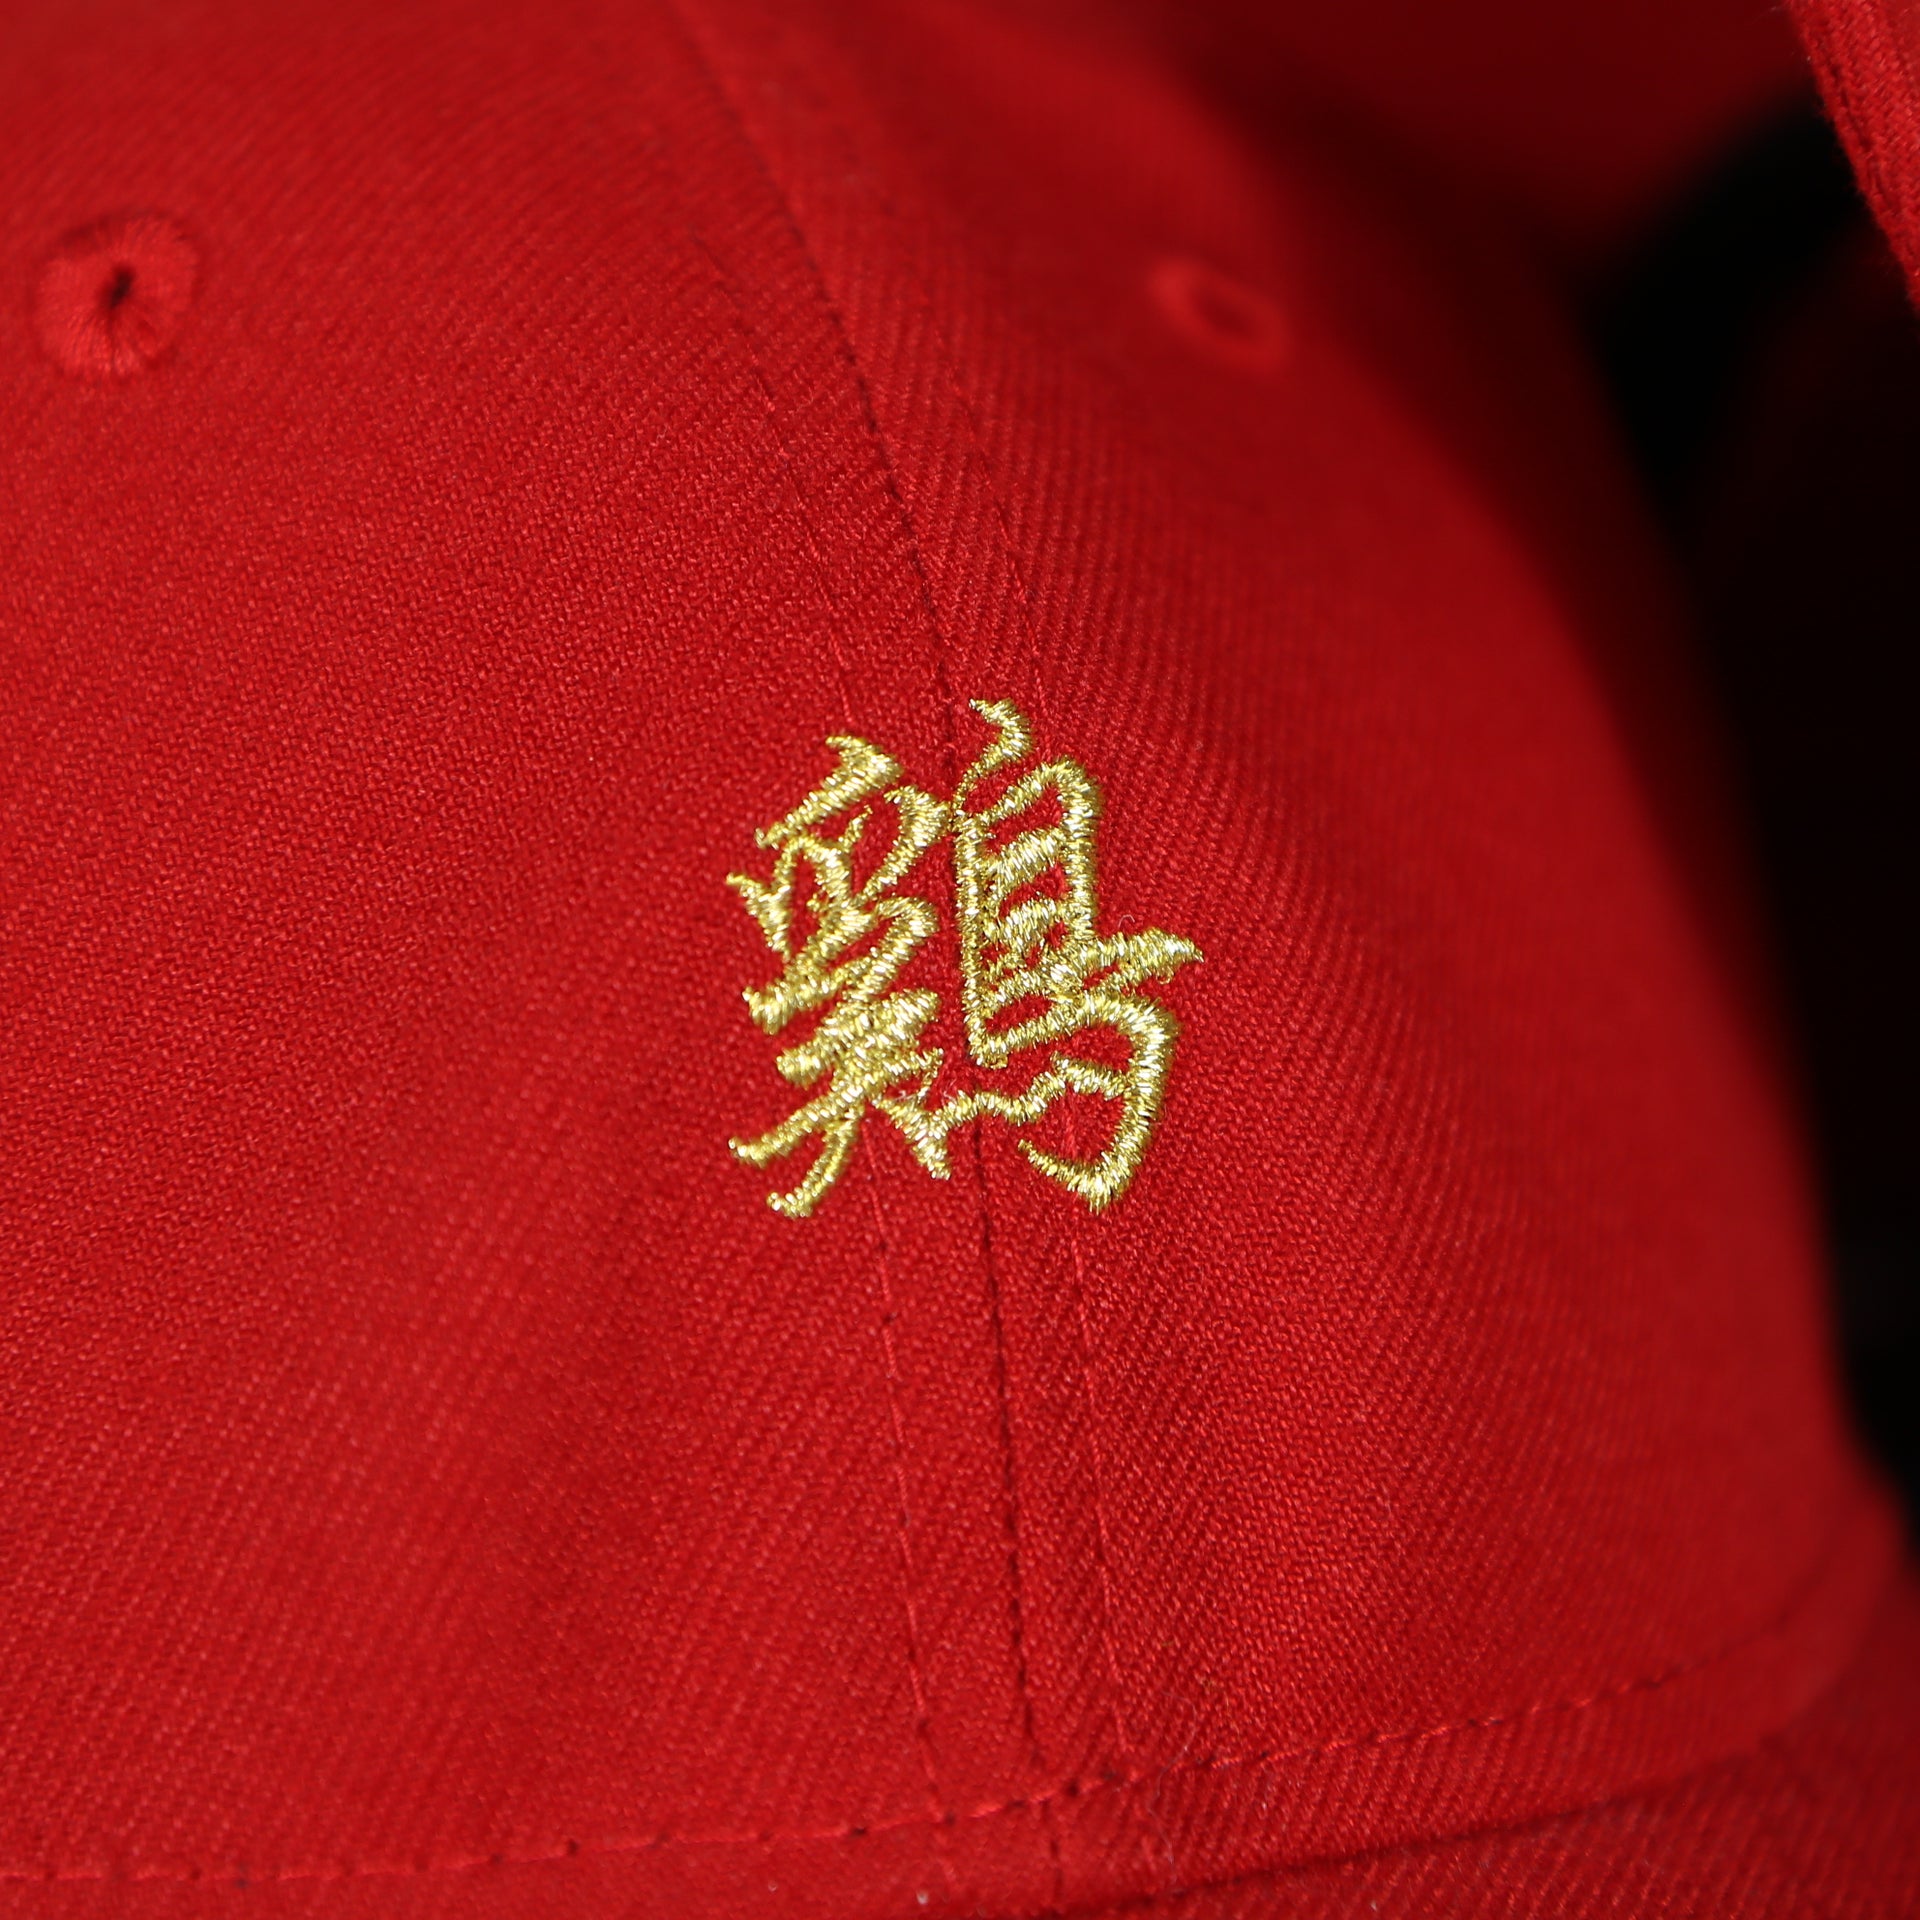 chinese zodiac logo on theYear Of The Rooster 2017 Chinese Zodiac Dad Hat | Red Baseball Hat